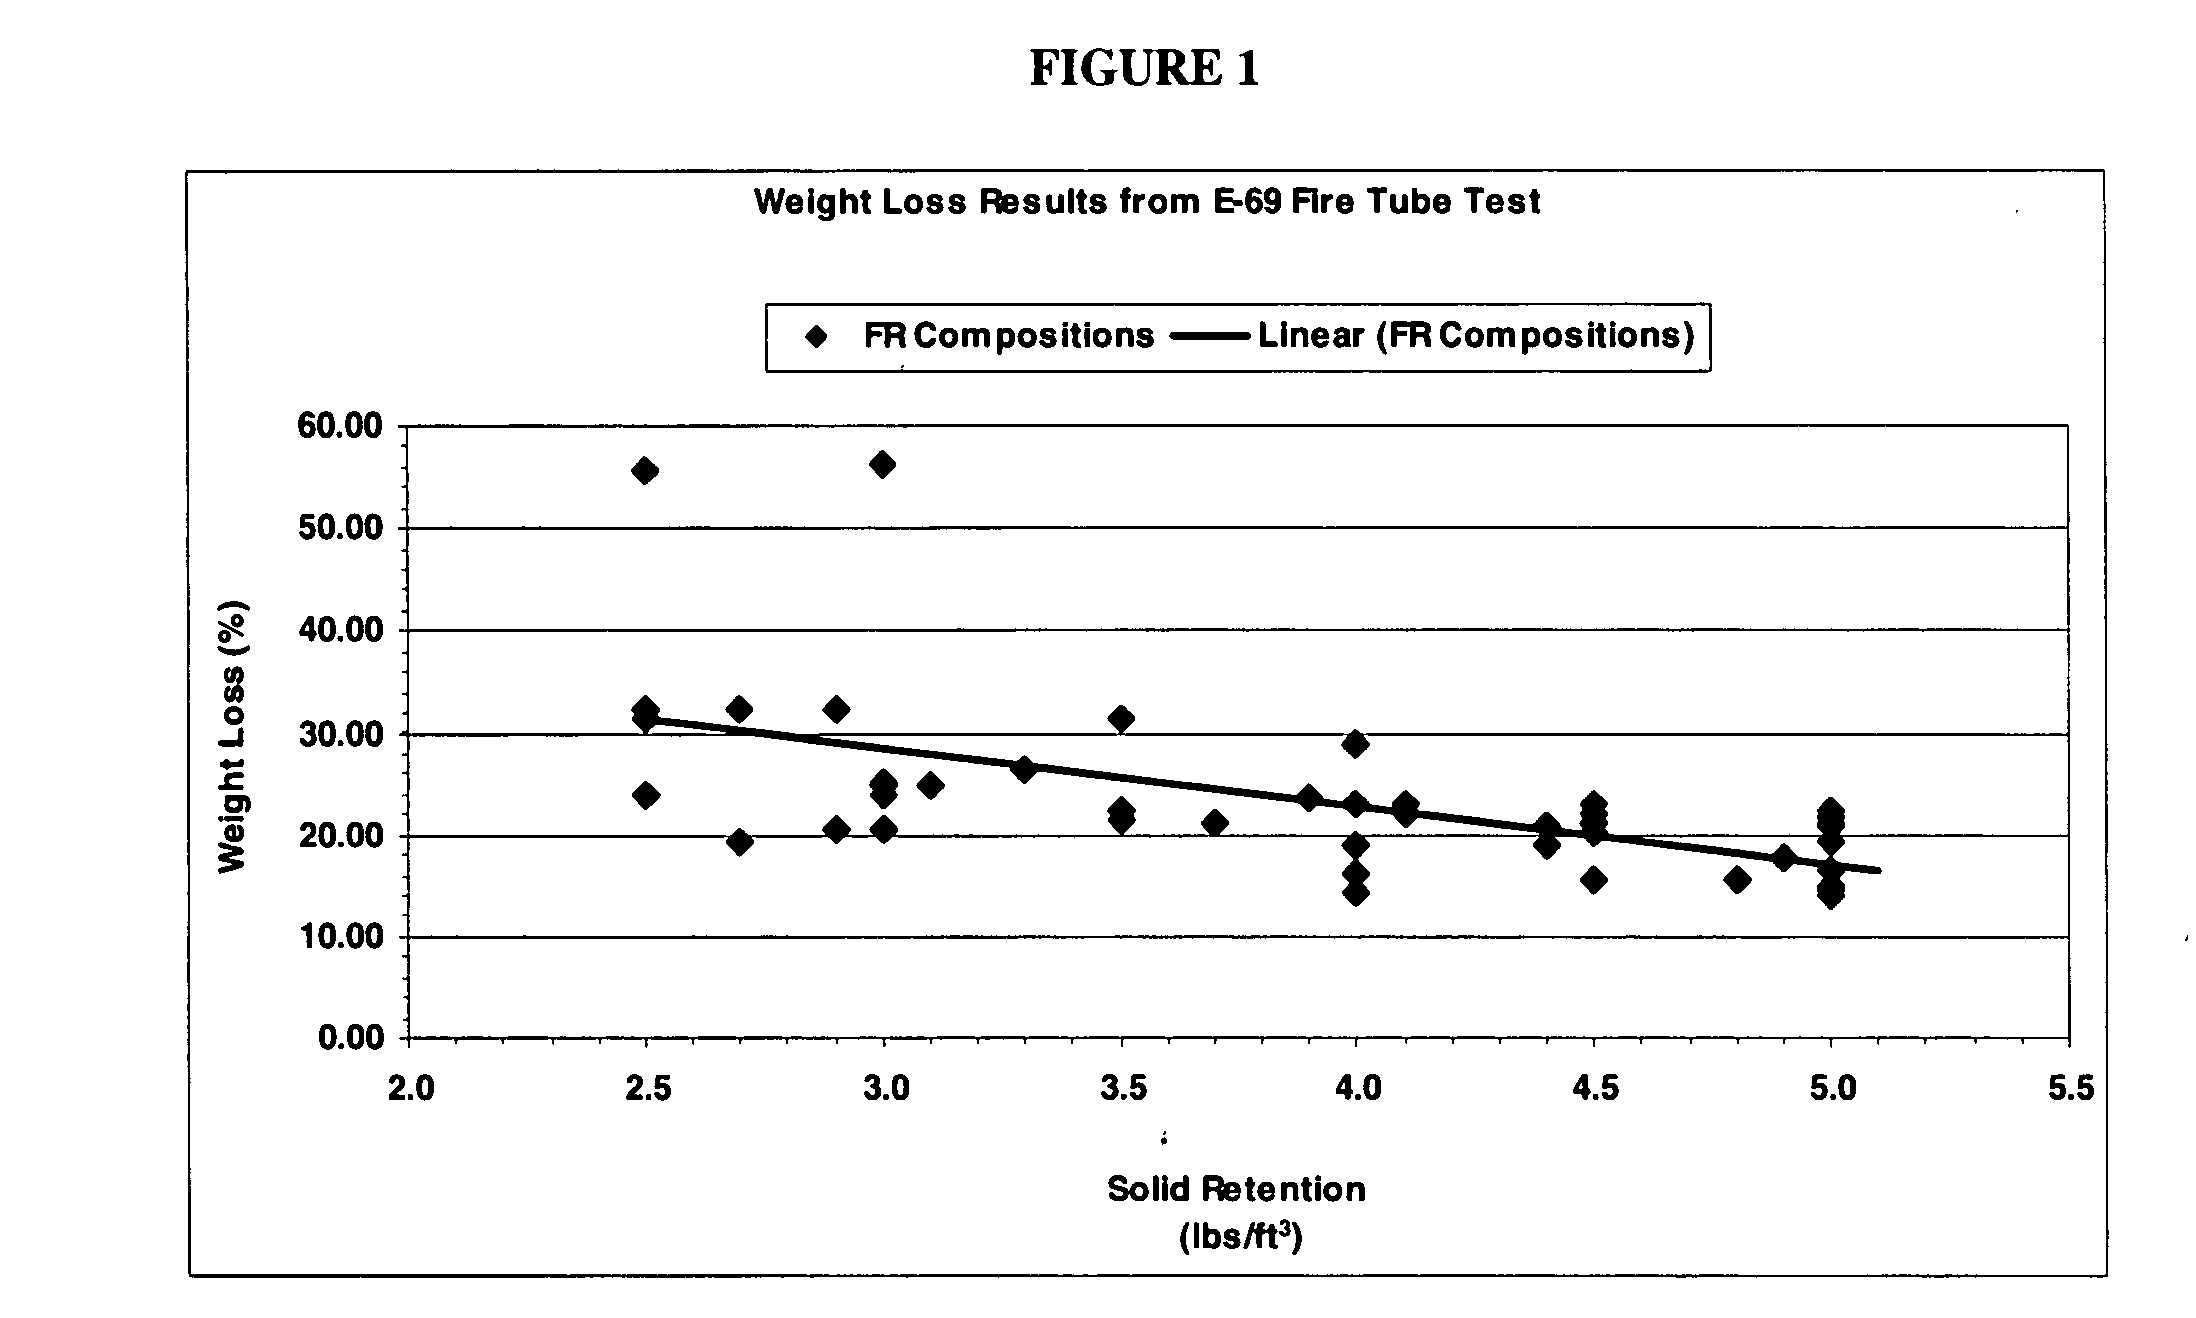 Fire-retardant compositions and methods of making and using same